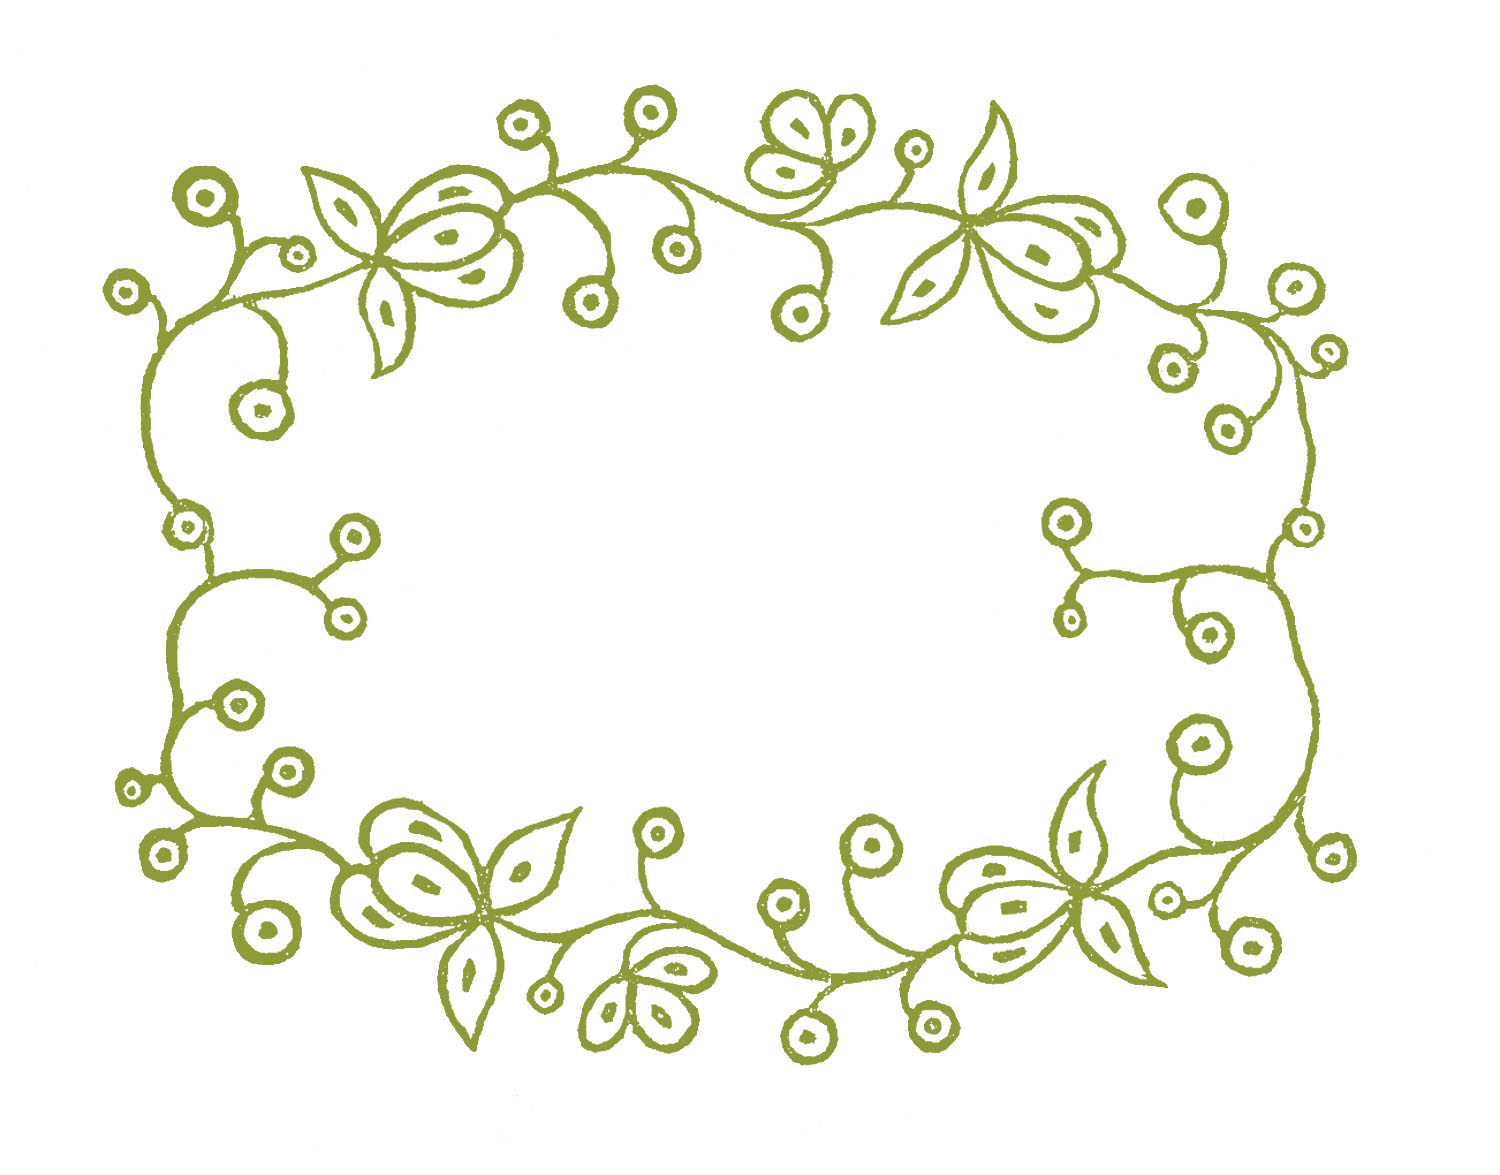 Free Vintage Embroidery Patterns Royalty Free Images Embroidery Patterns Floral Frames The